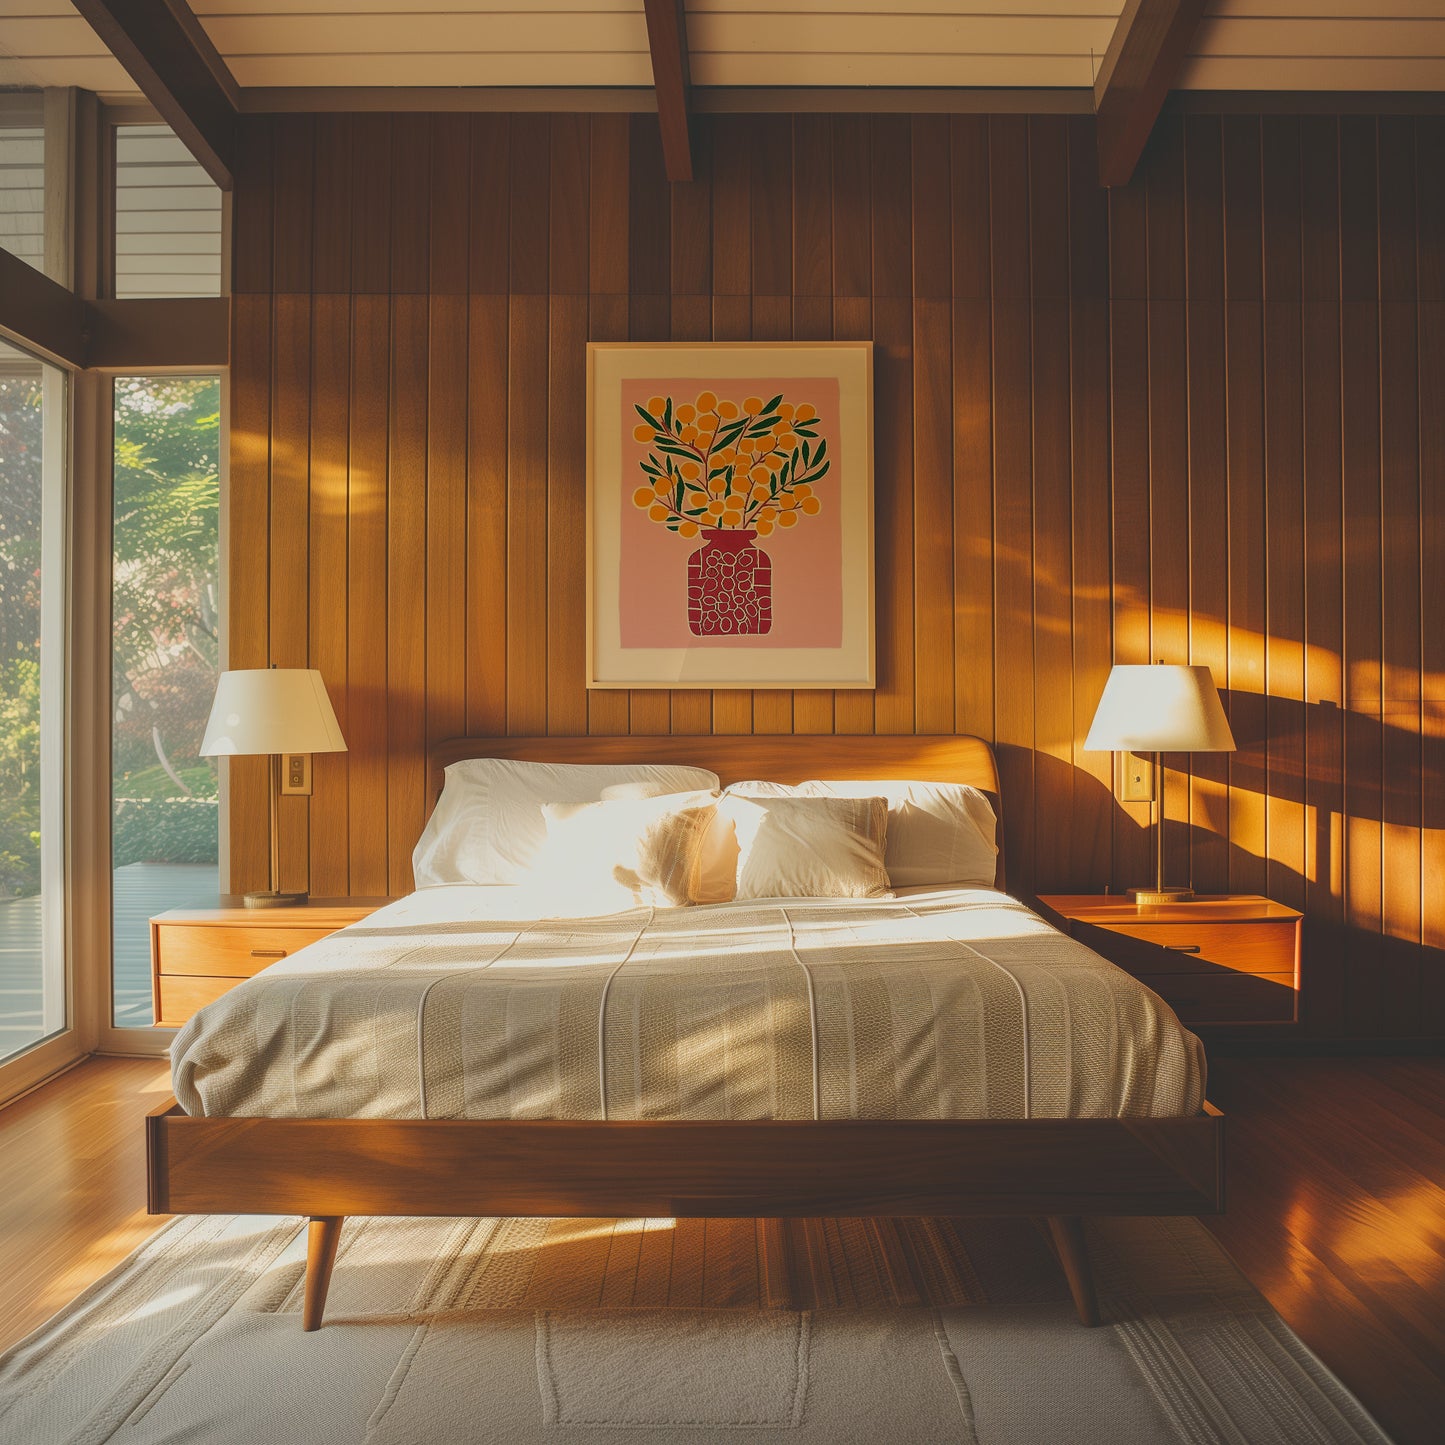 A cozy modern bedroom at sunset with warm lighting, wooden walls, and a framed artwork above the bed.